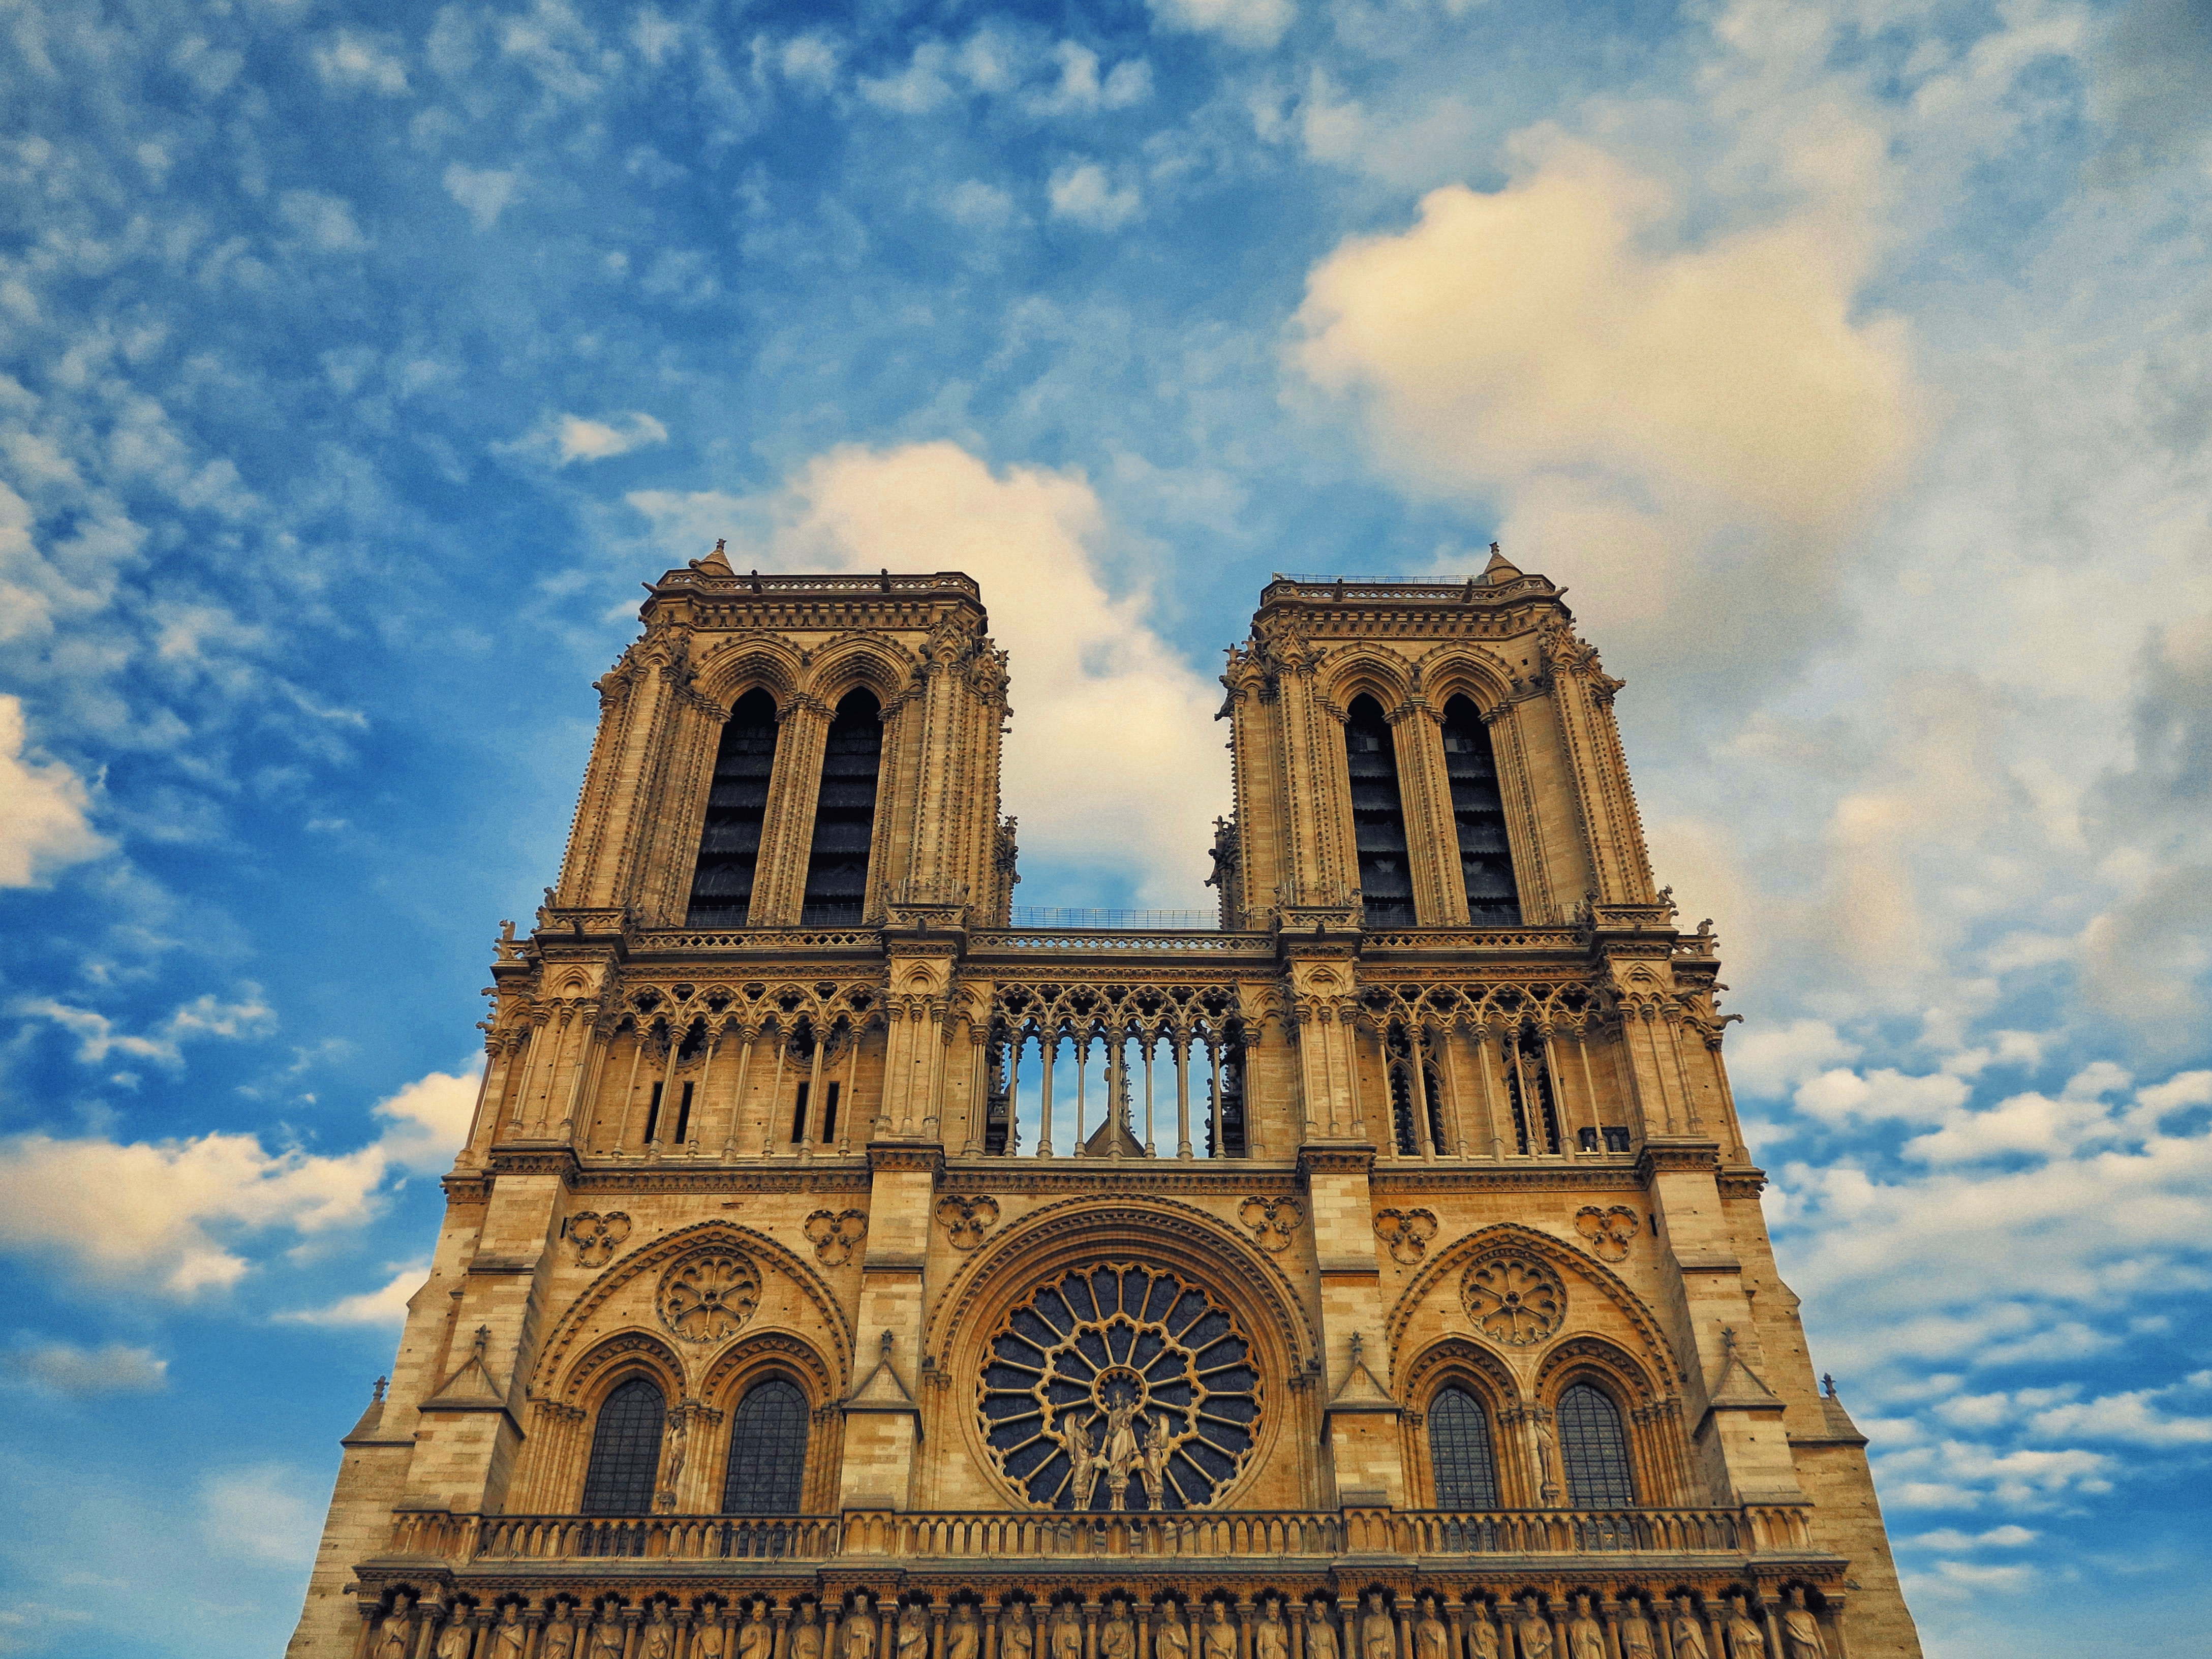 notre dame cathedral against a blue sky